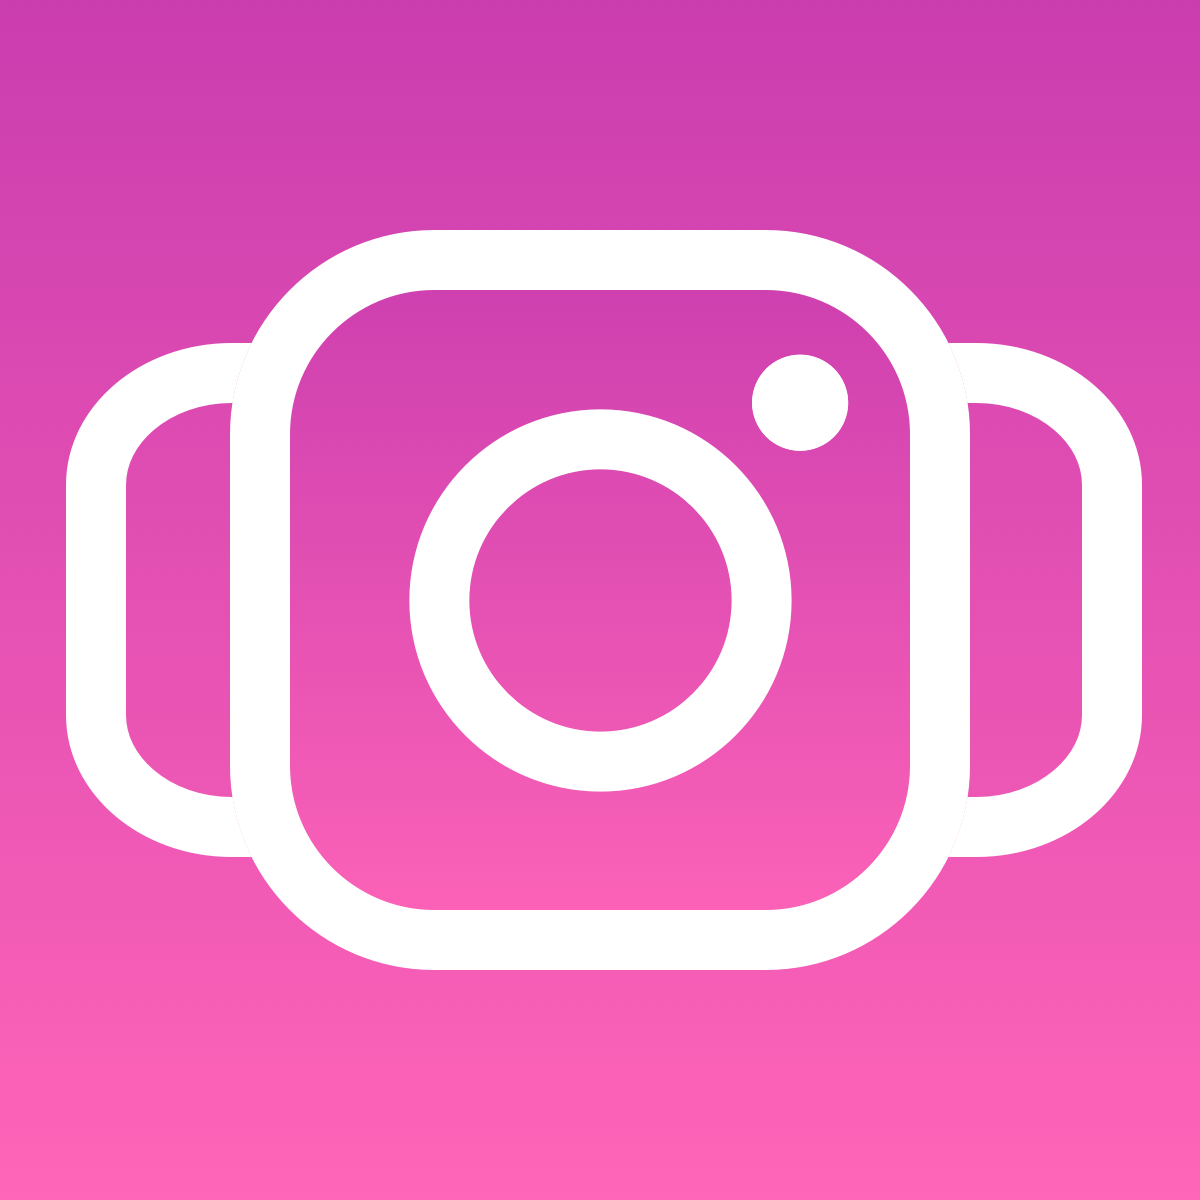 Hire Shopify Experts to integrate Instagram Slider Feed app into a Shopify store